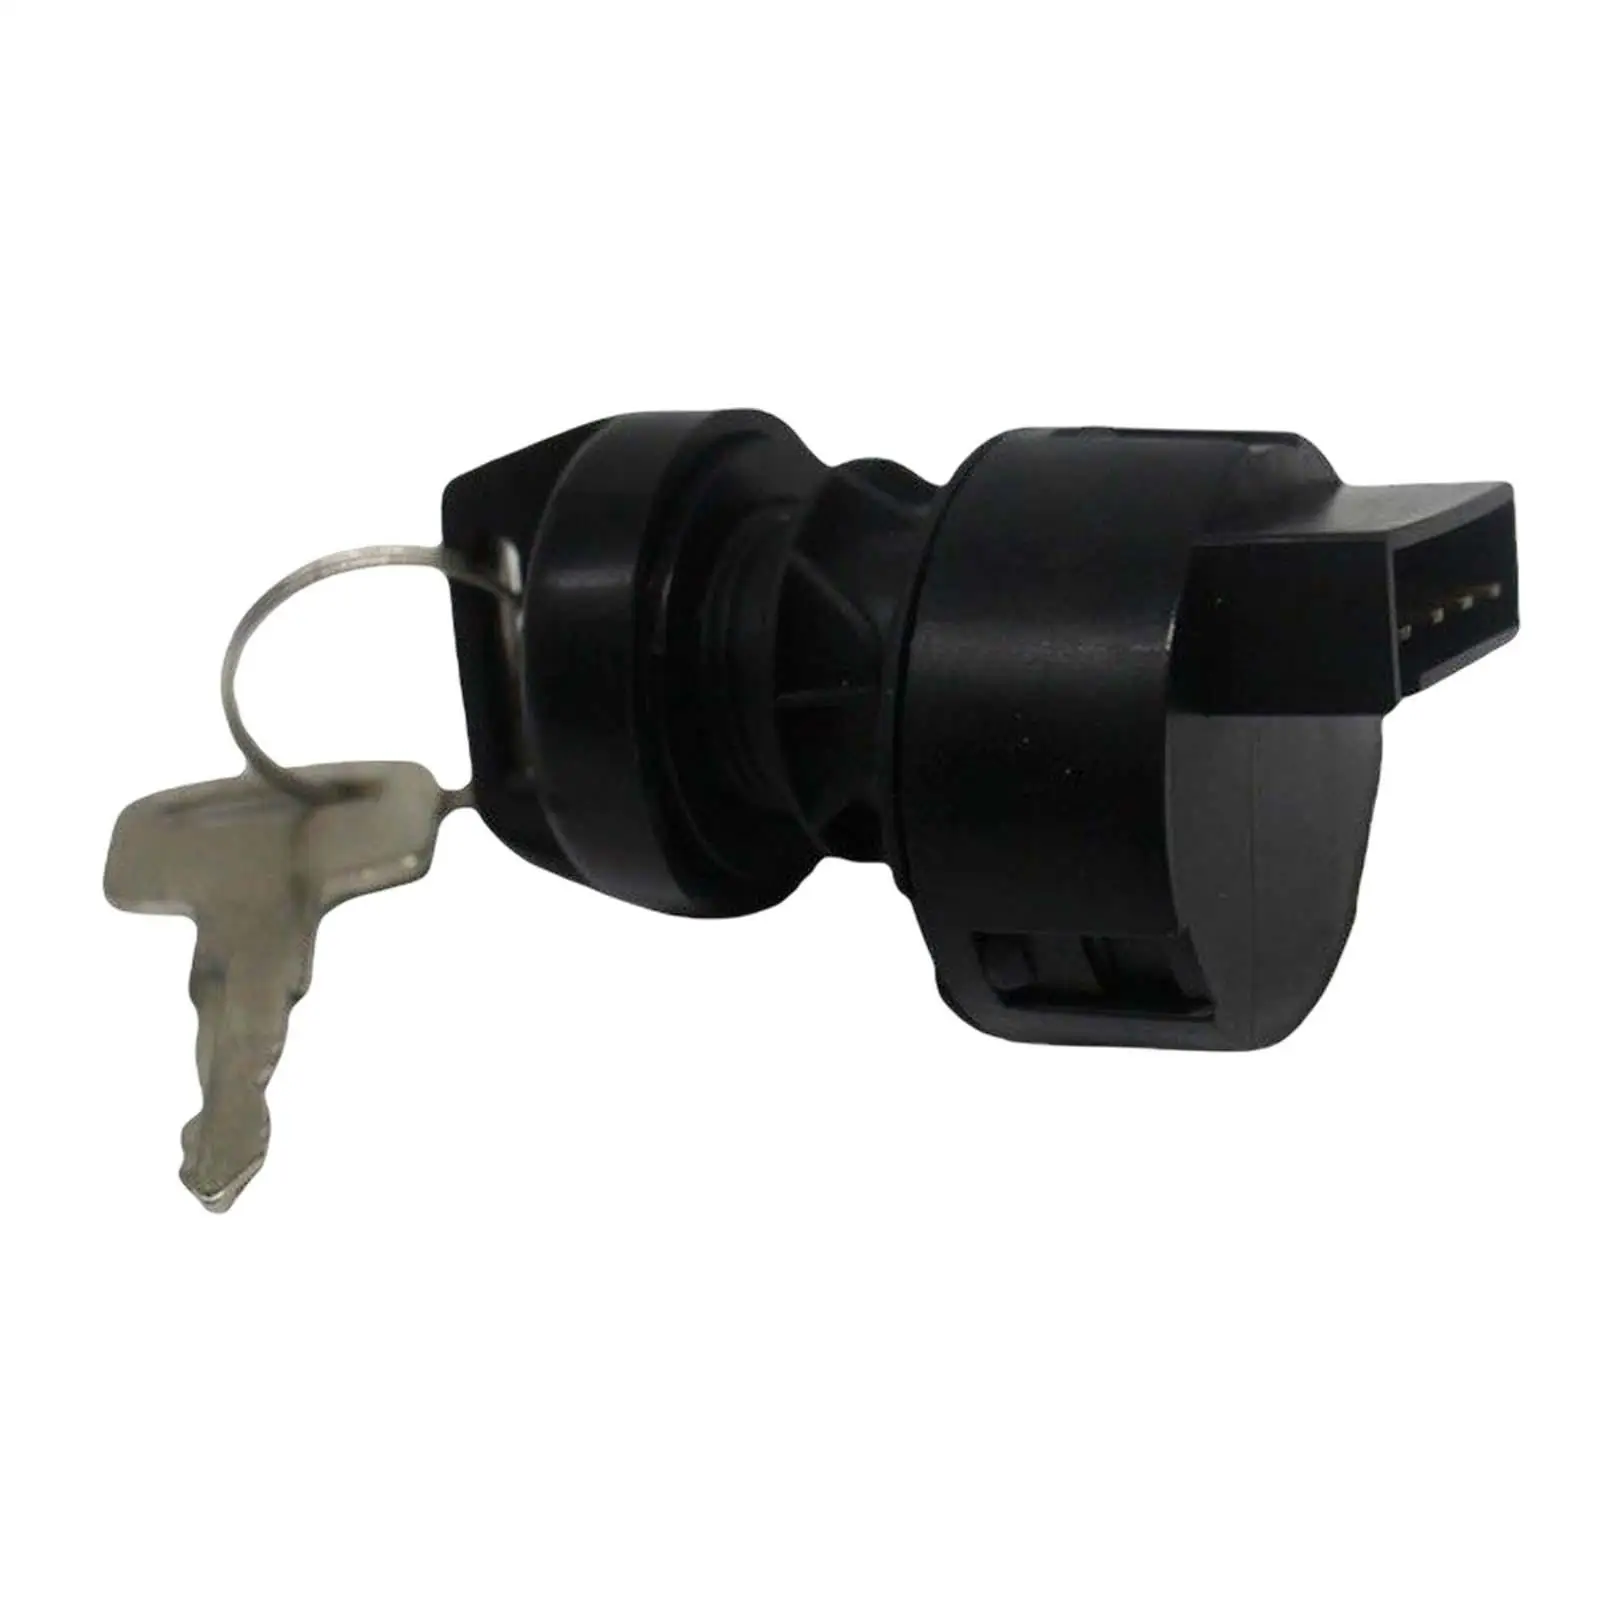 Ignition Switch Lock Premium with 2 Keys Accessory Replaces Practical Easy to Install for Polaris Sportsman 335 400 500 600